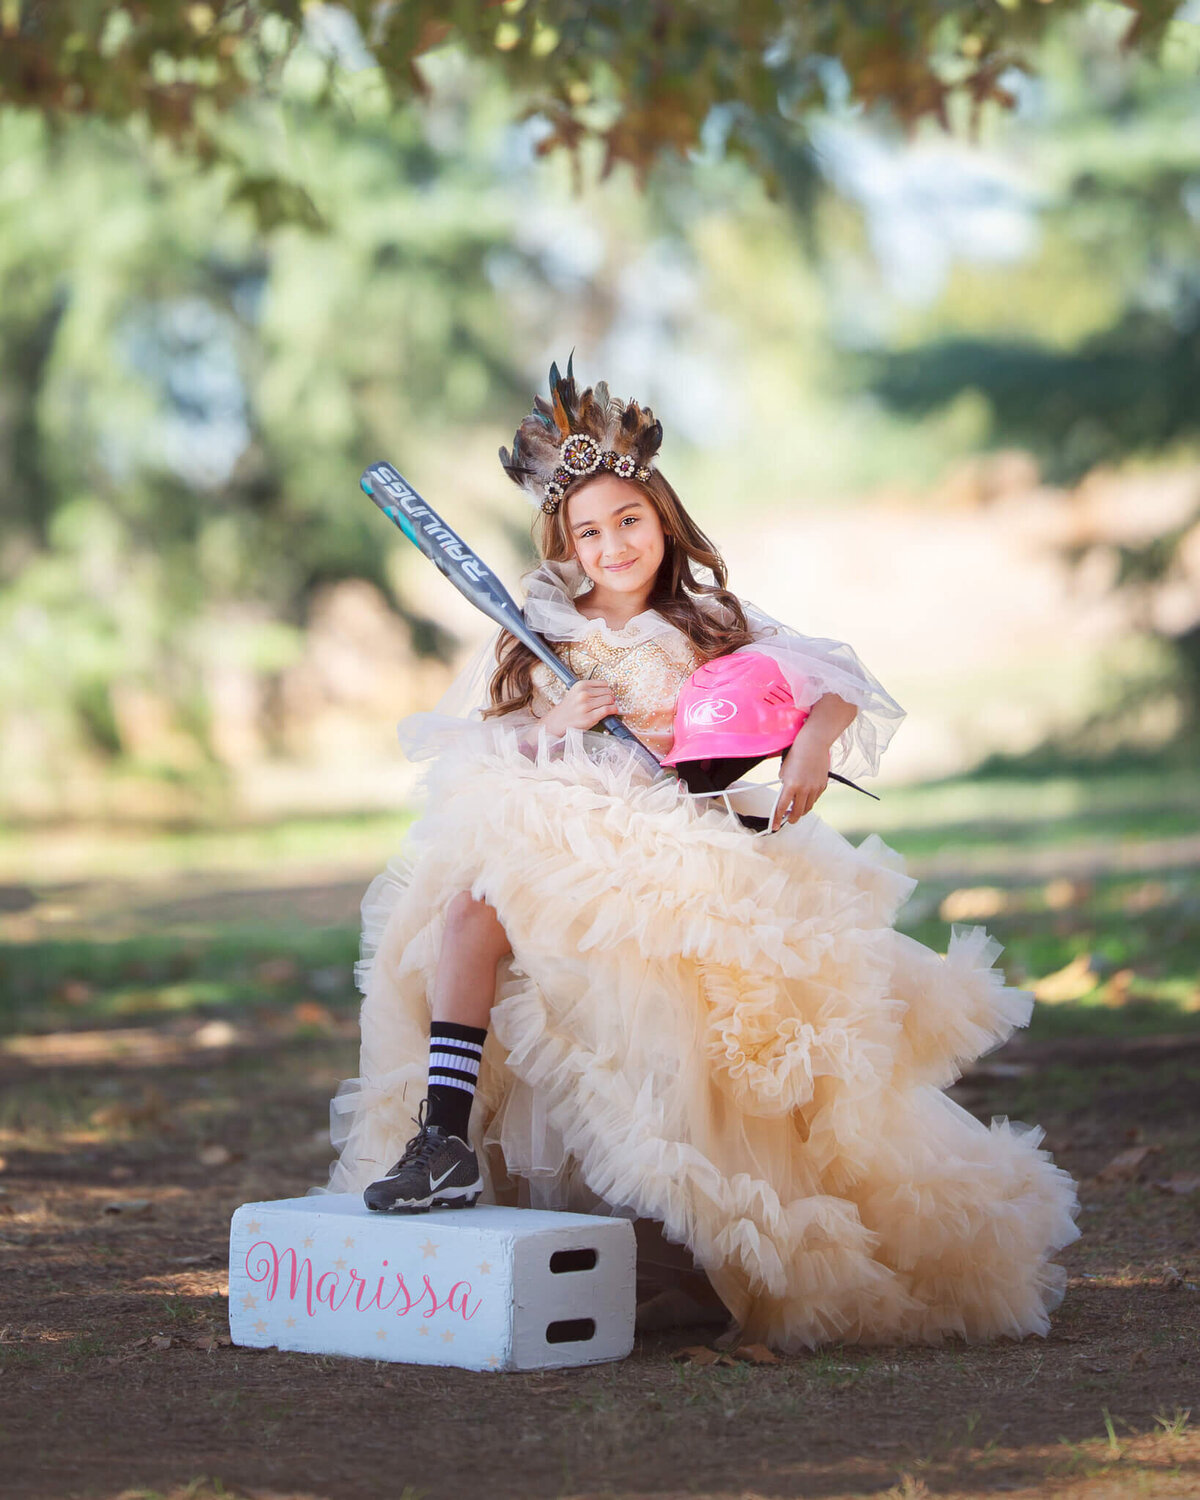 Girl wearing couture gown holding softball bat and hat photographed by Elsie Rose Photography